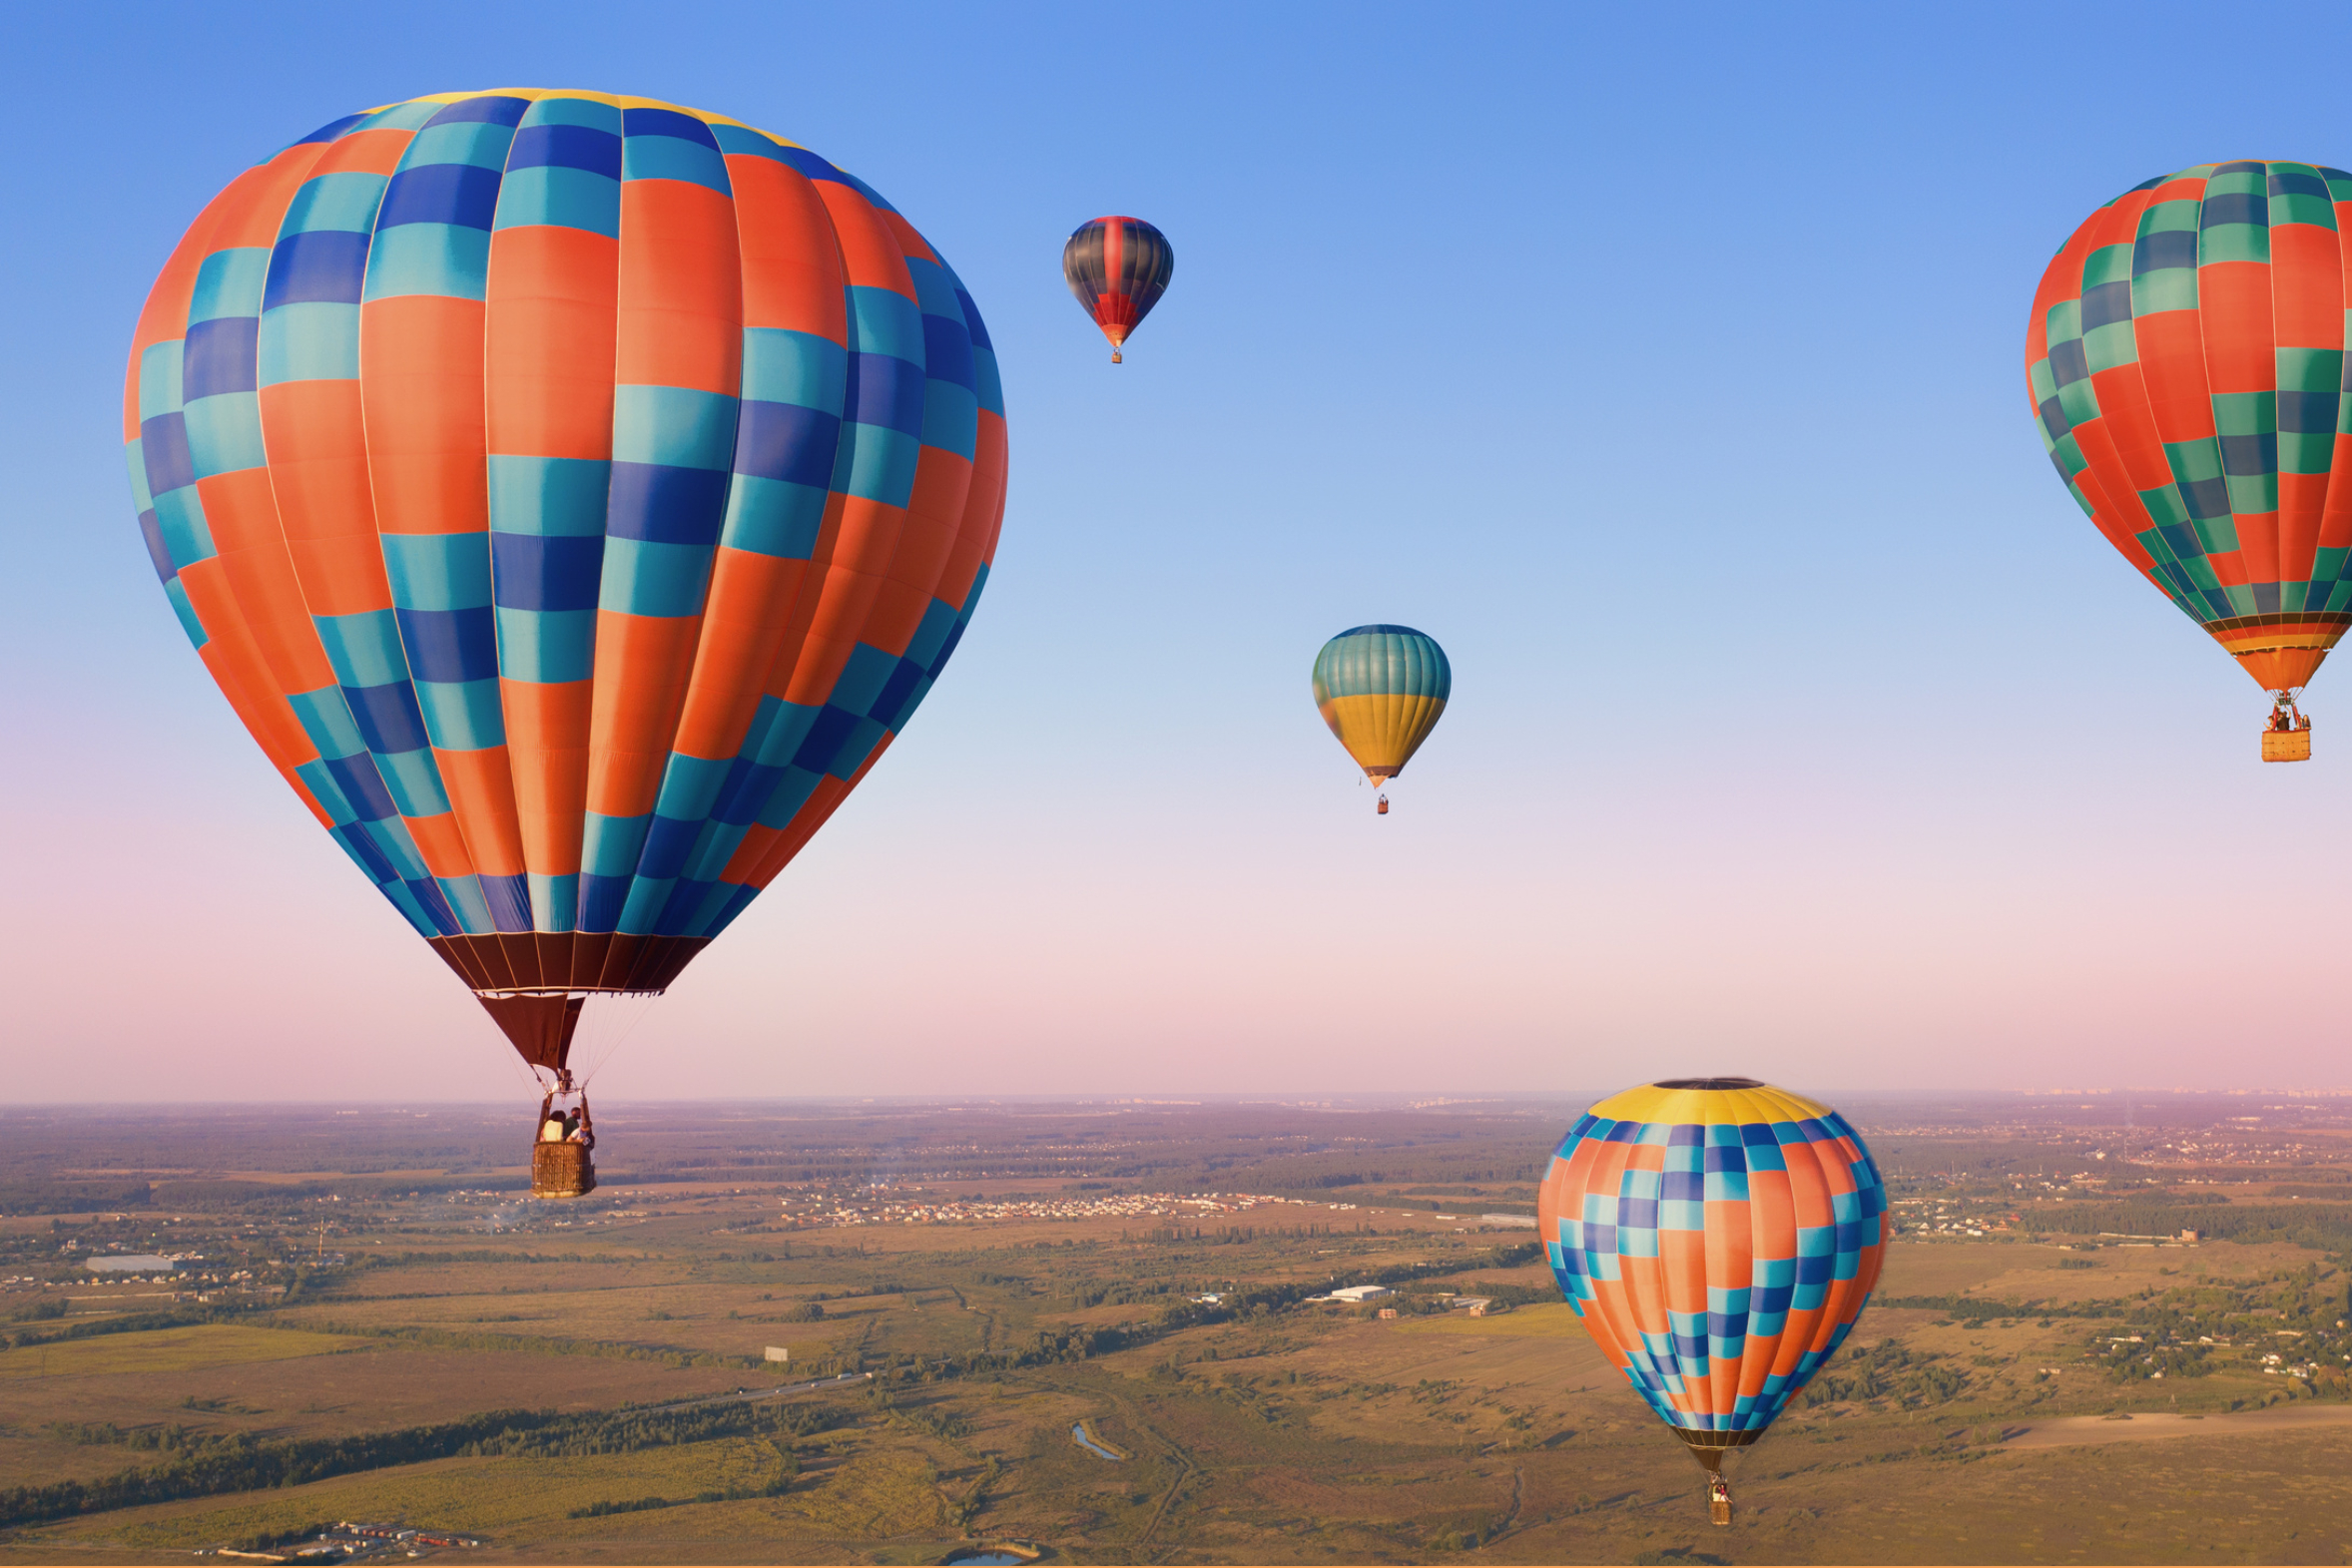 A picture of an orange and blue hot air balloon.